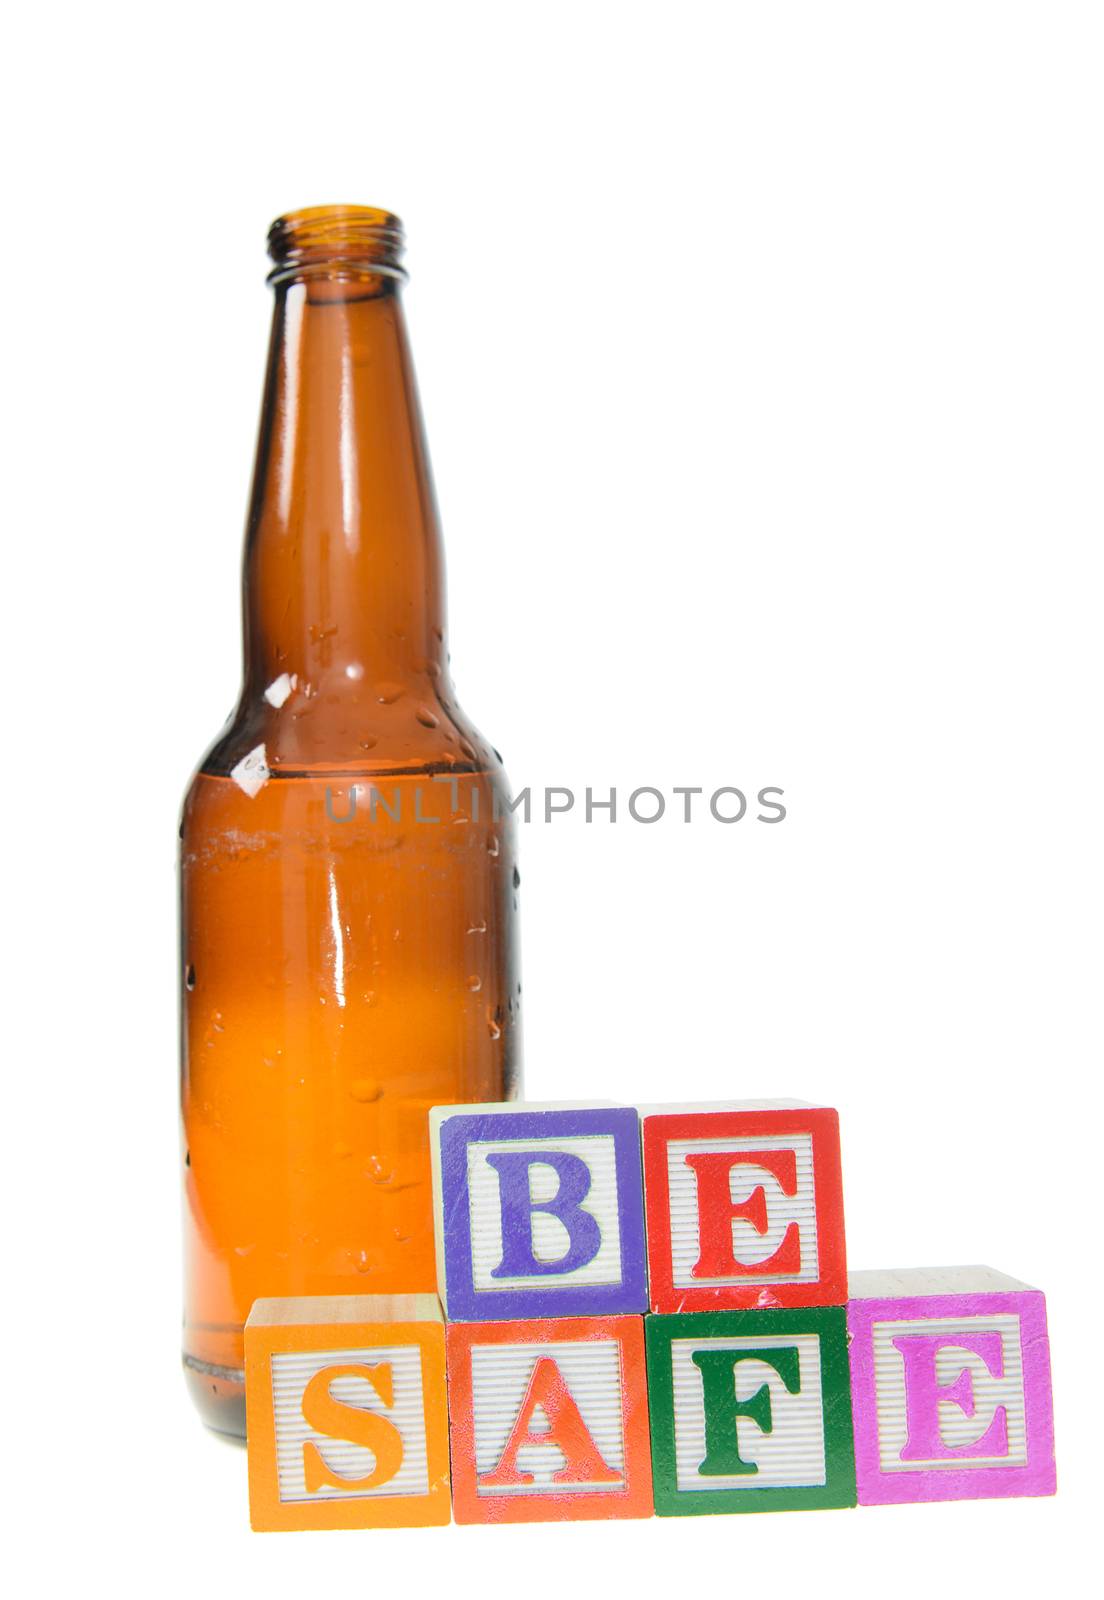 Letter blocks spelling be safe with a beer bottle by dragon_fang